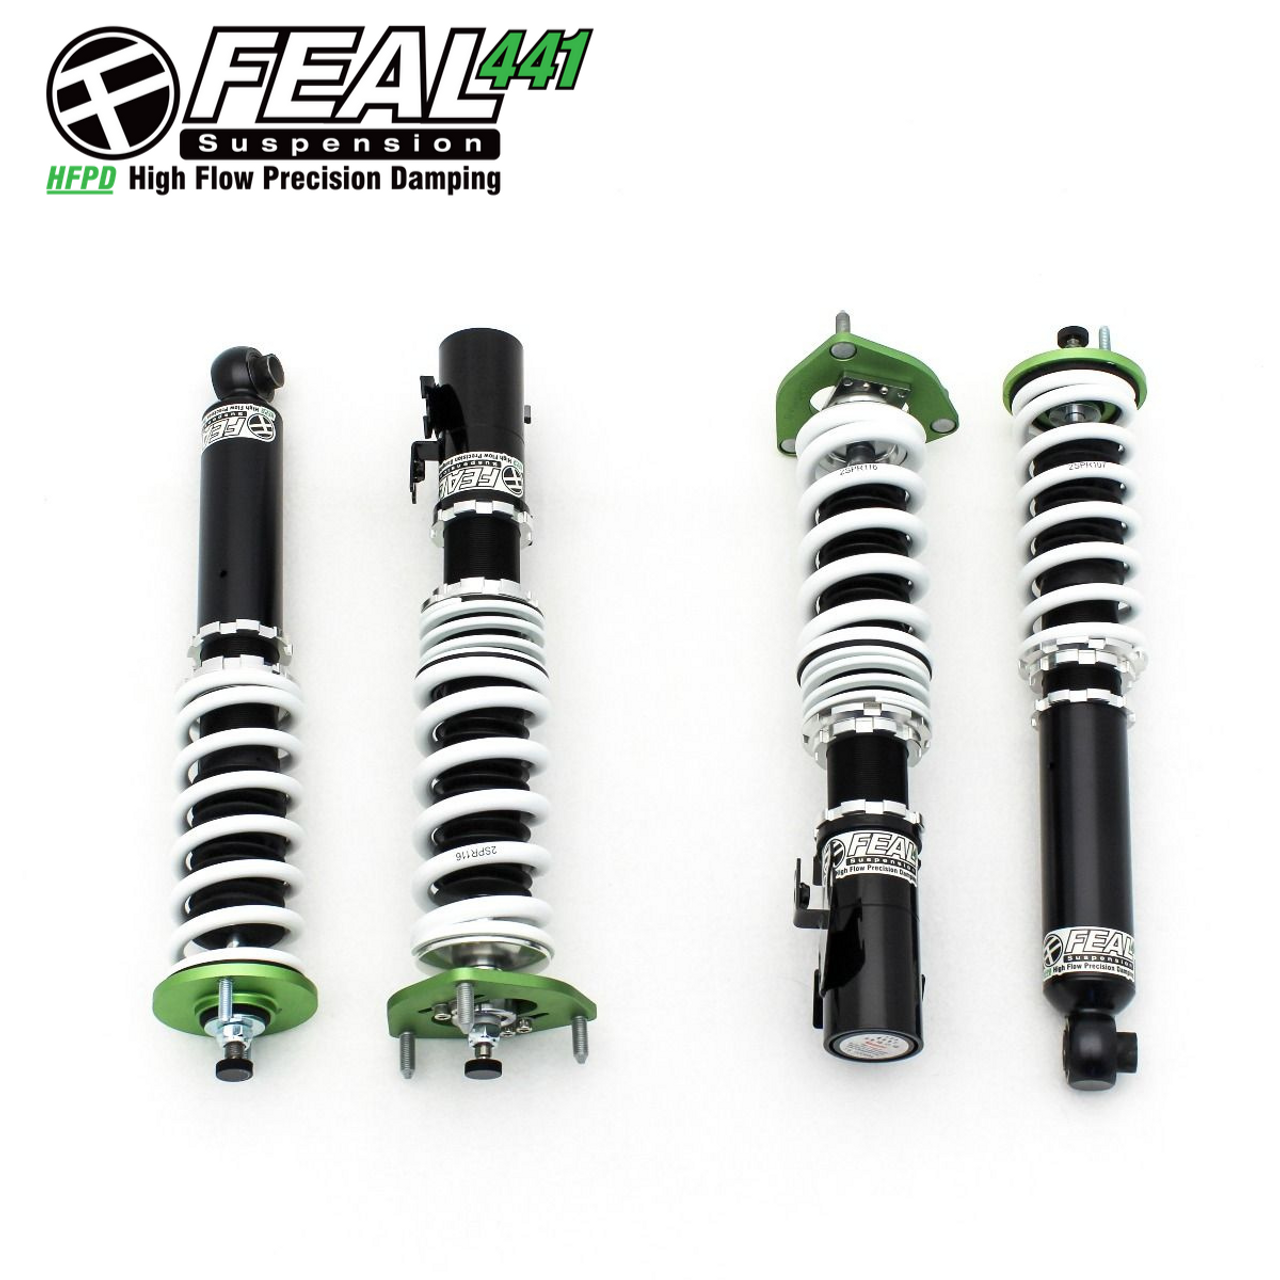 Feal Suspension 441 Coilover Kit, AWD - Infiniti Q50 Non-DDS